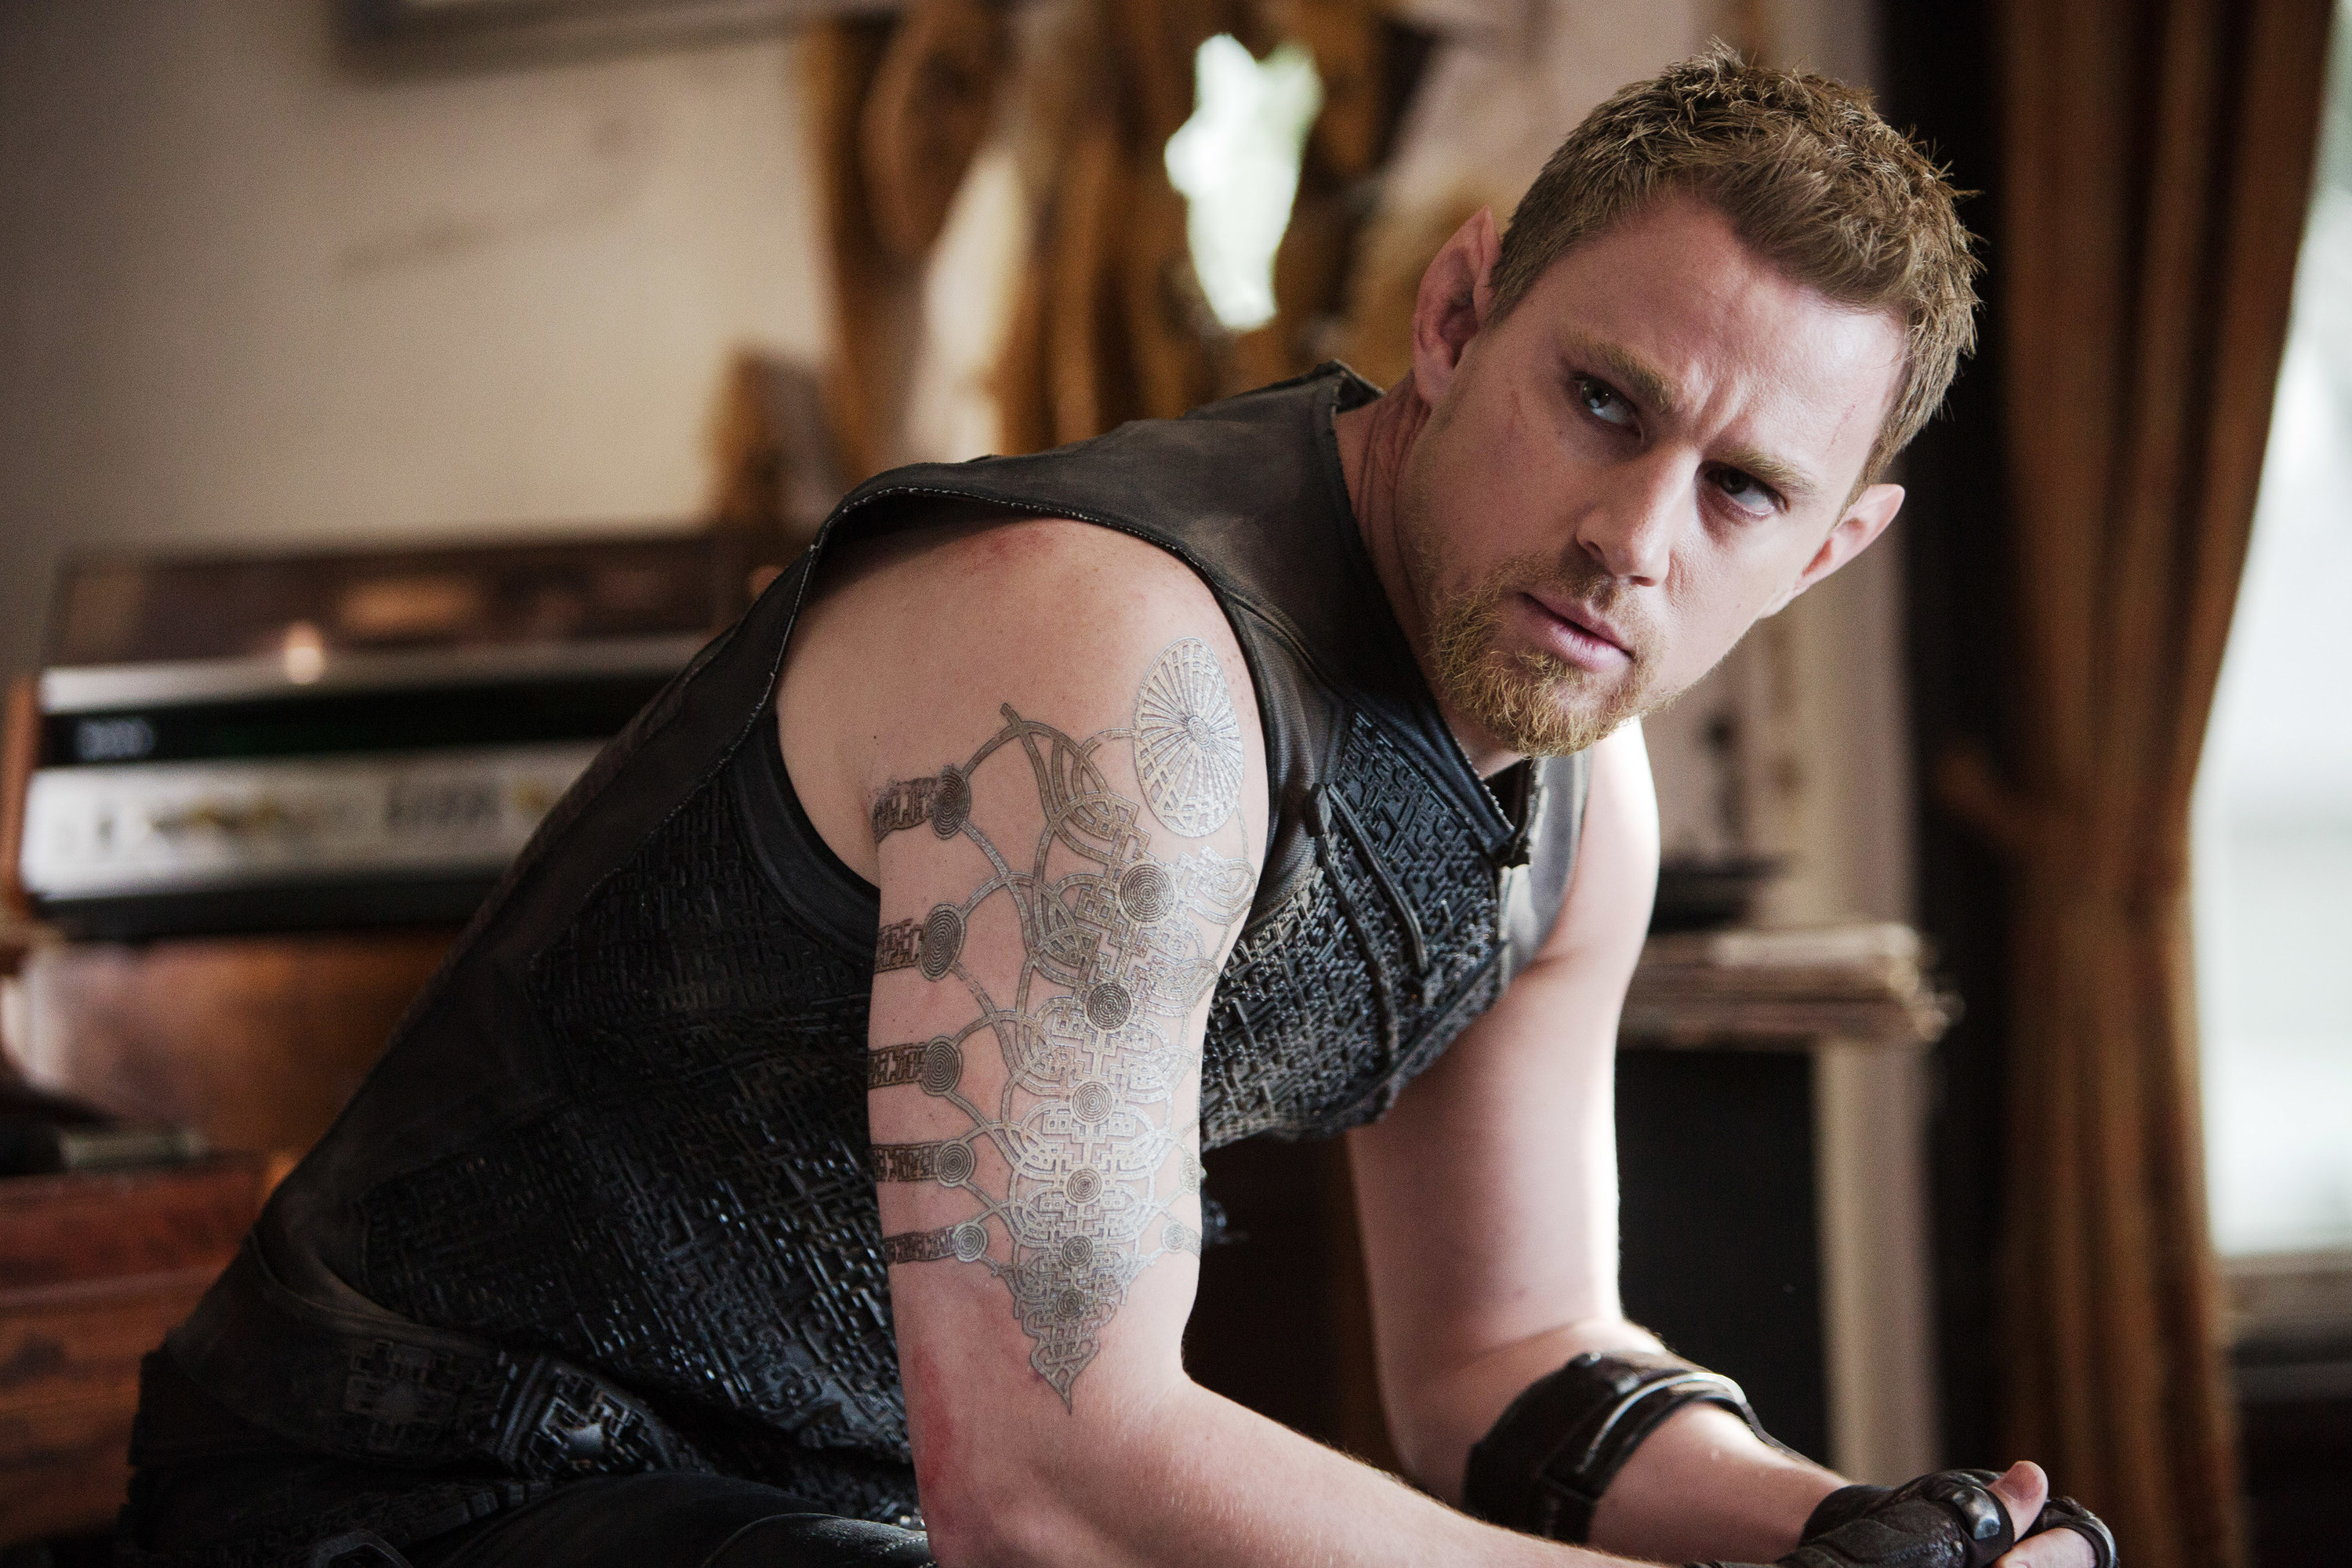 Tatum leans over while sitting down in a scene from Jupiter Ascending